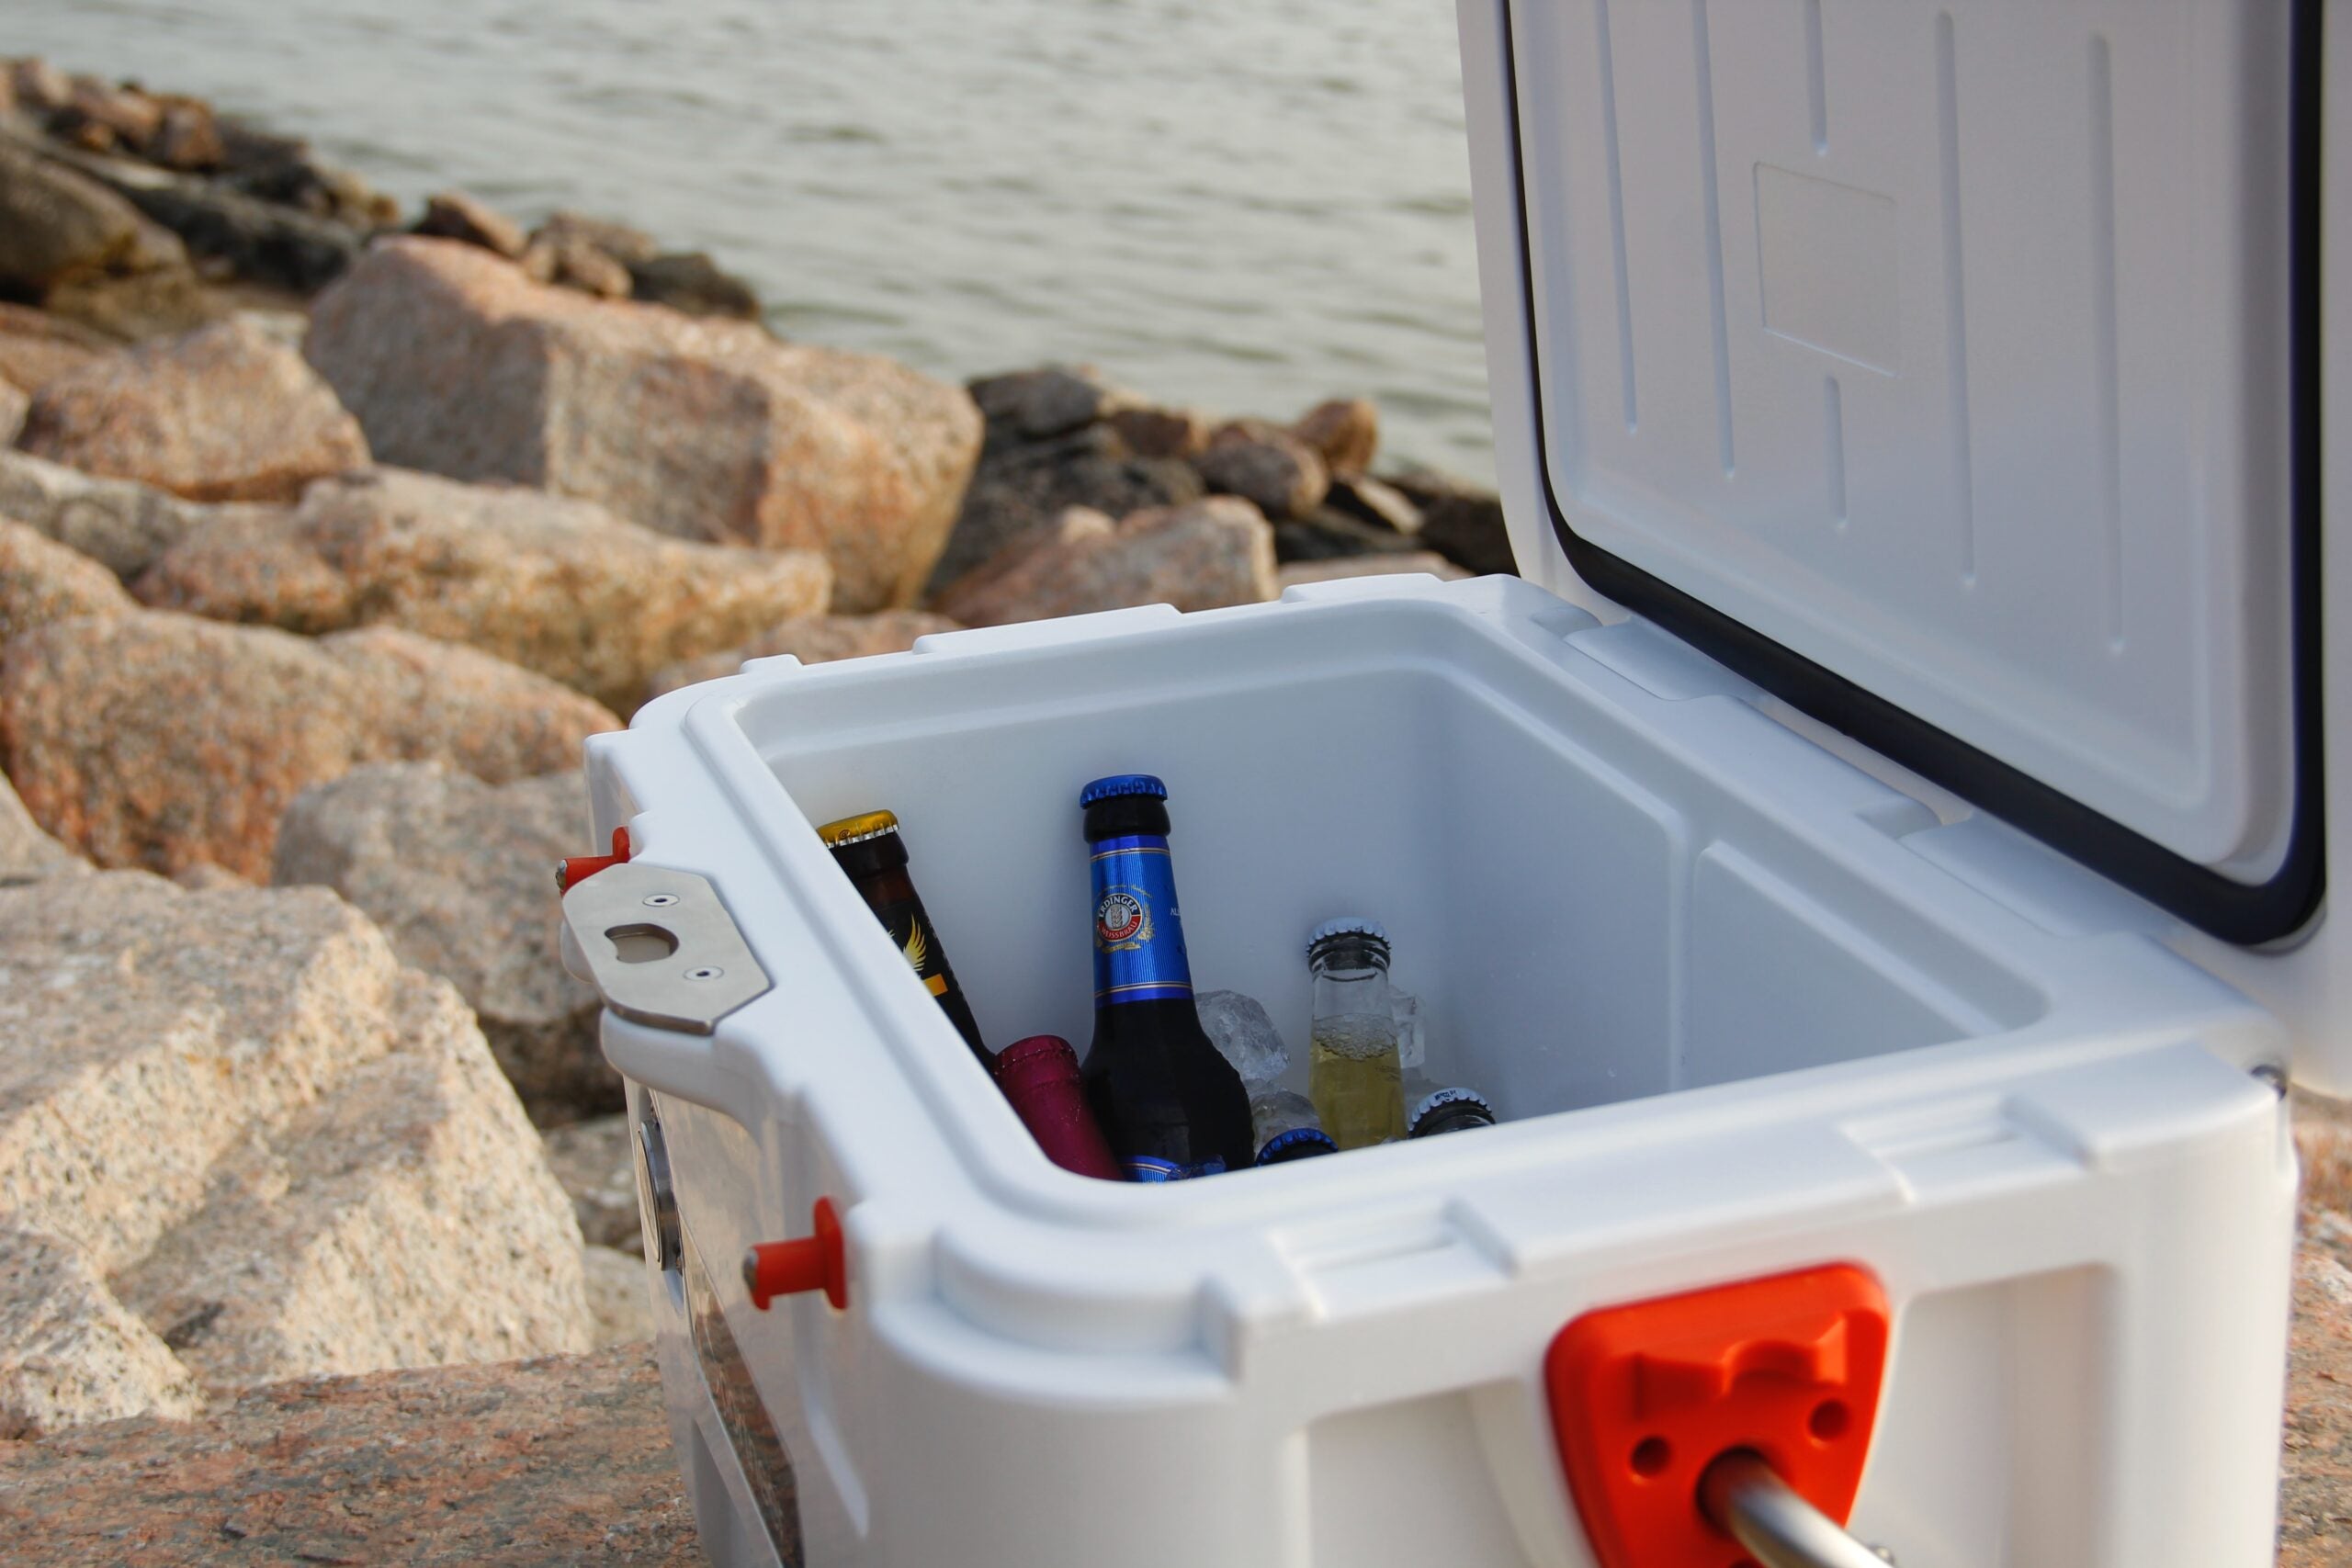 Gear Rx: Camping Cooler Repair and Packing Tips